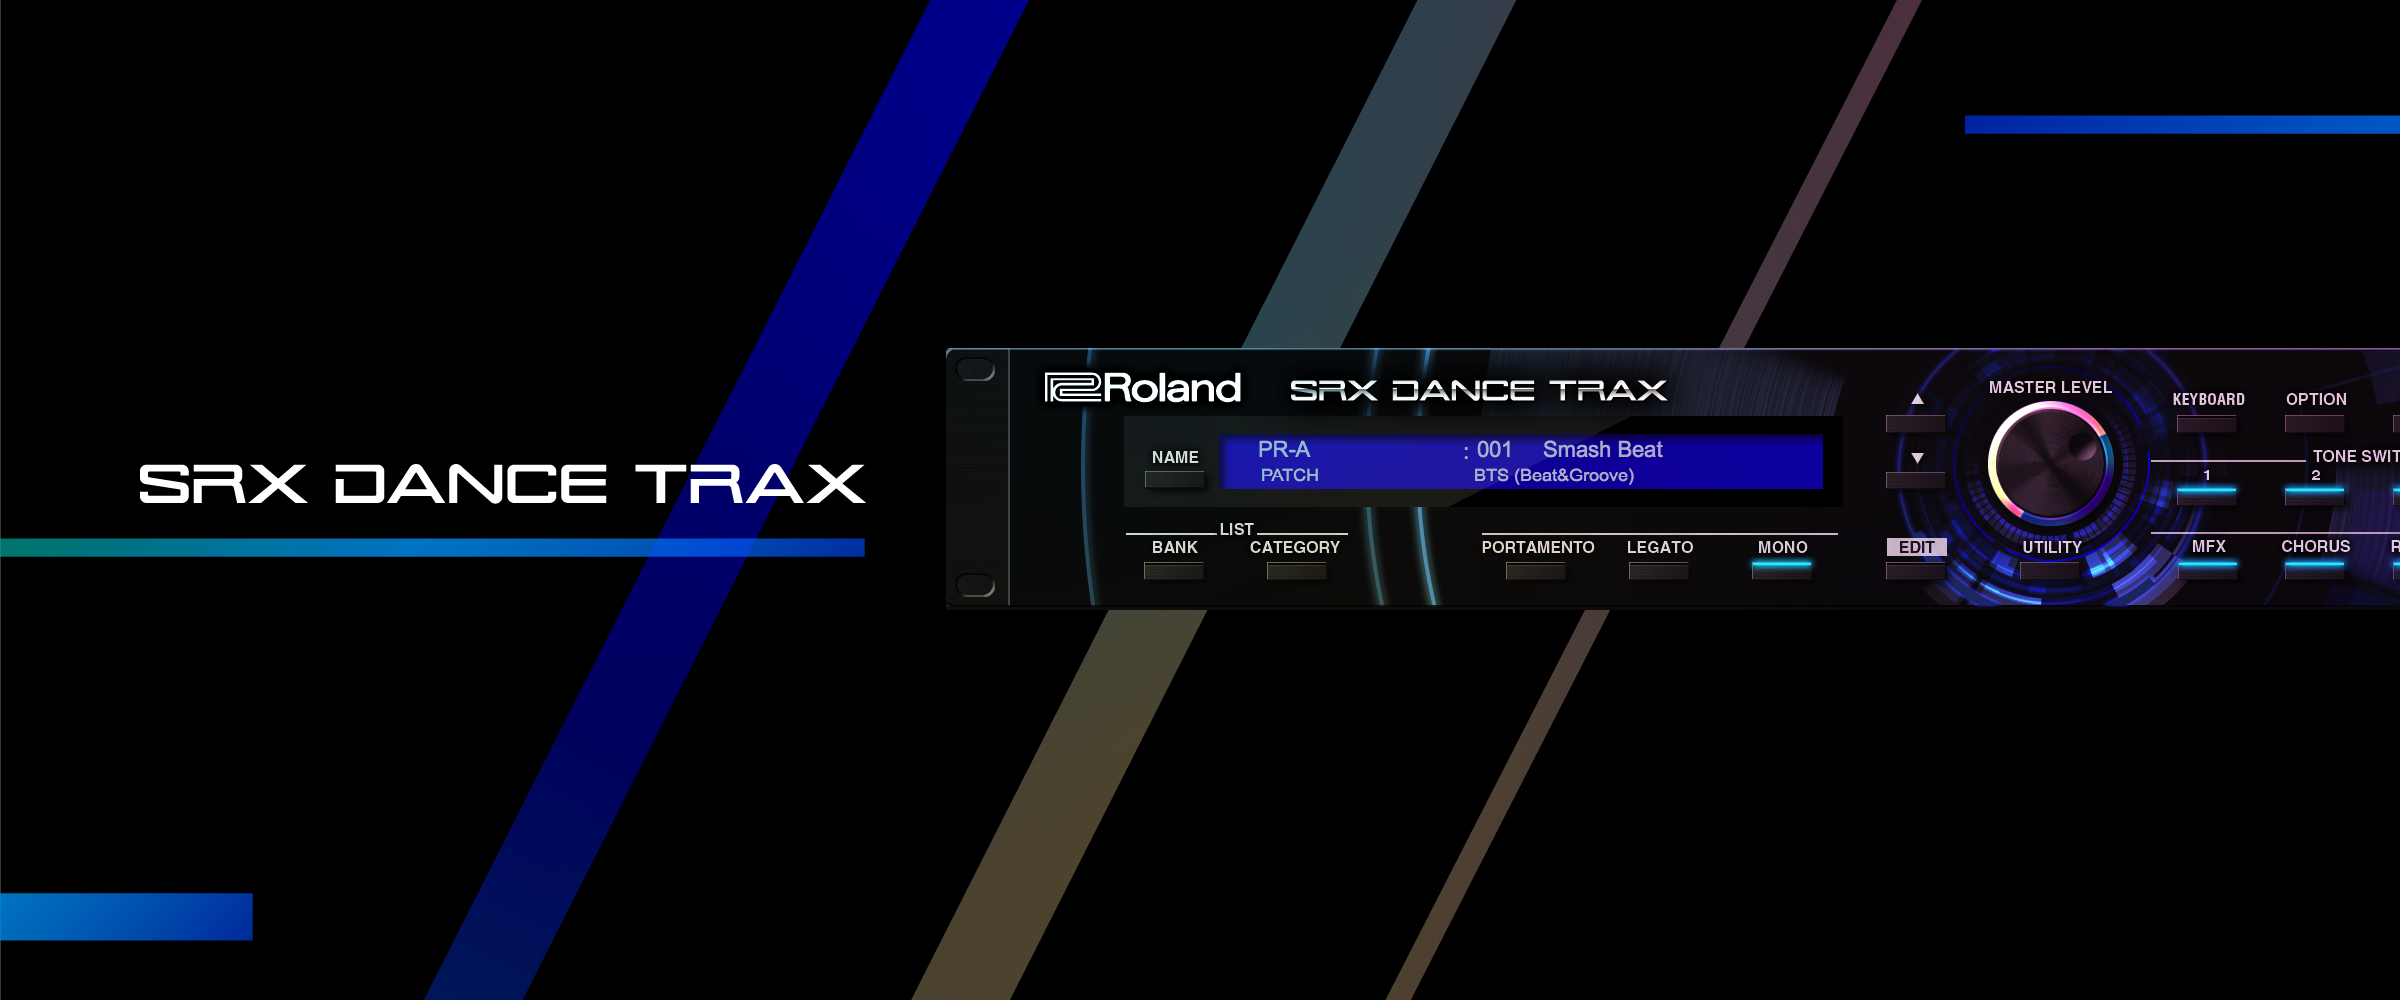 SRX DANCE TRAX Now Available!